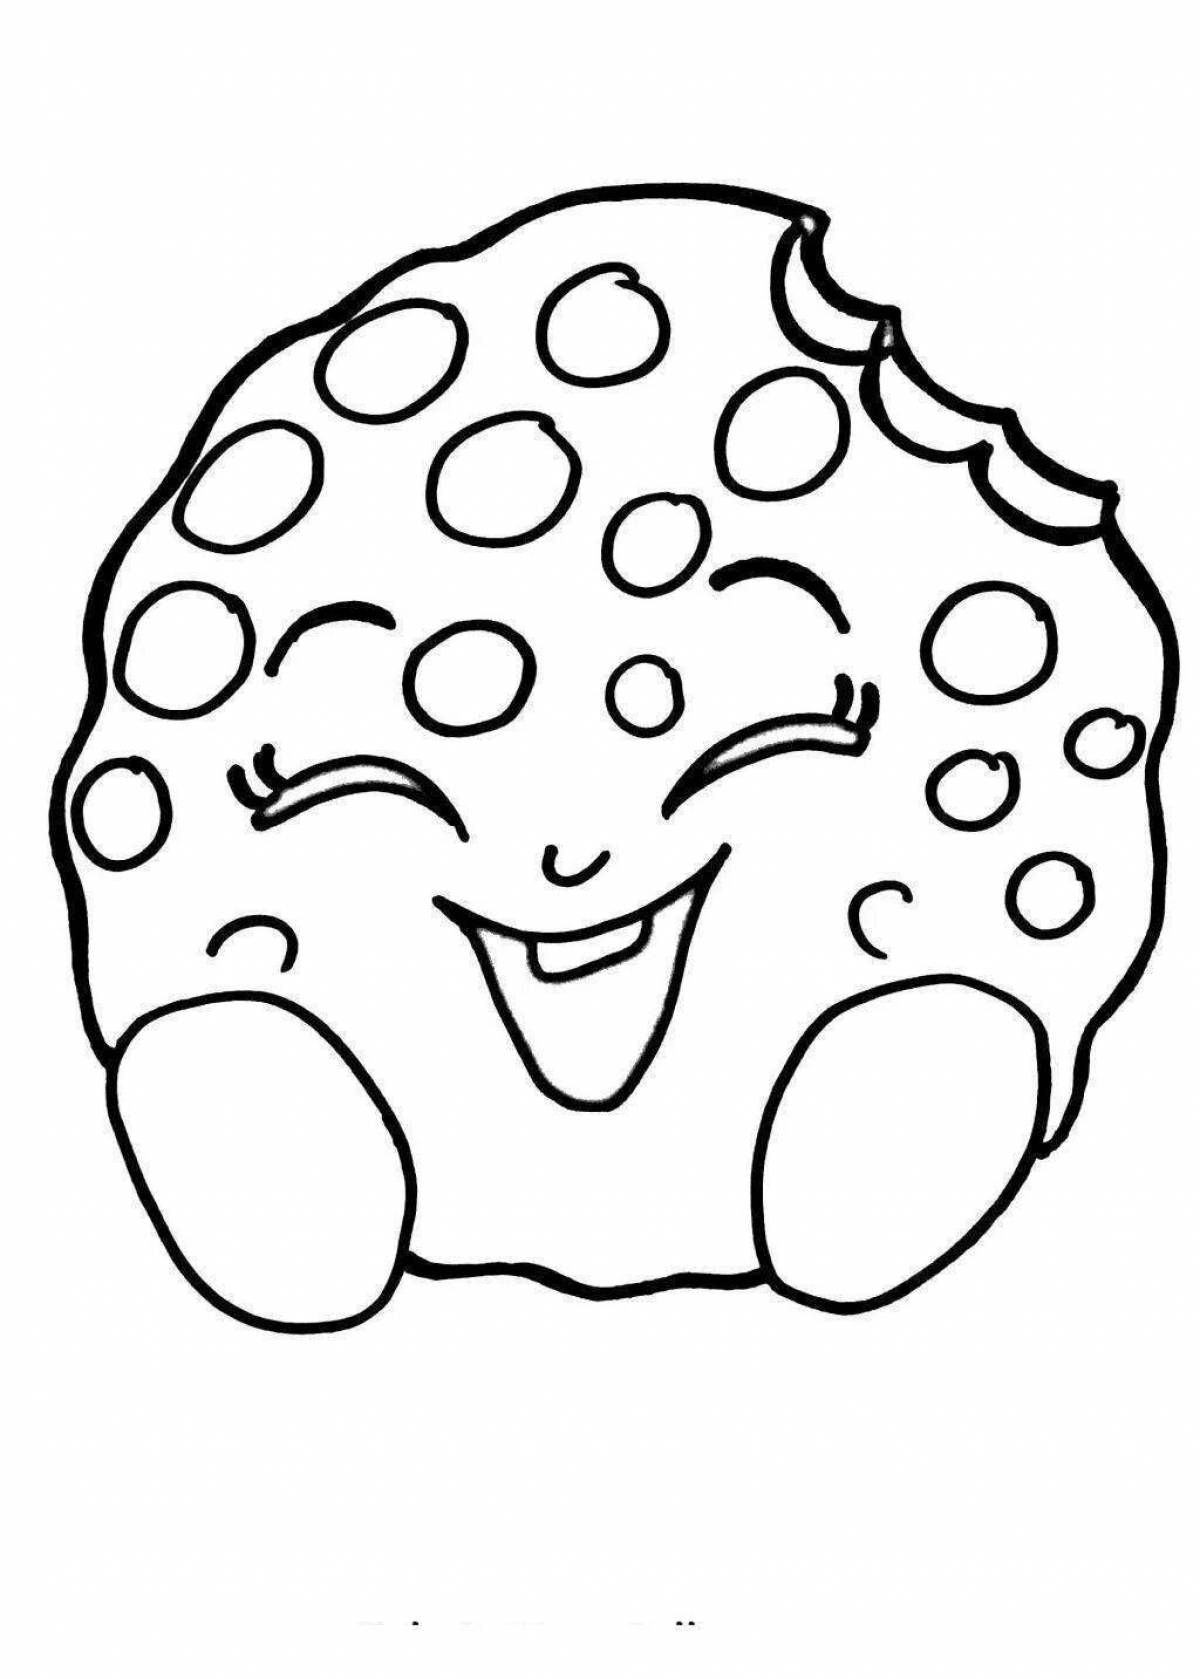 Colorful cookie coloring page